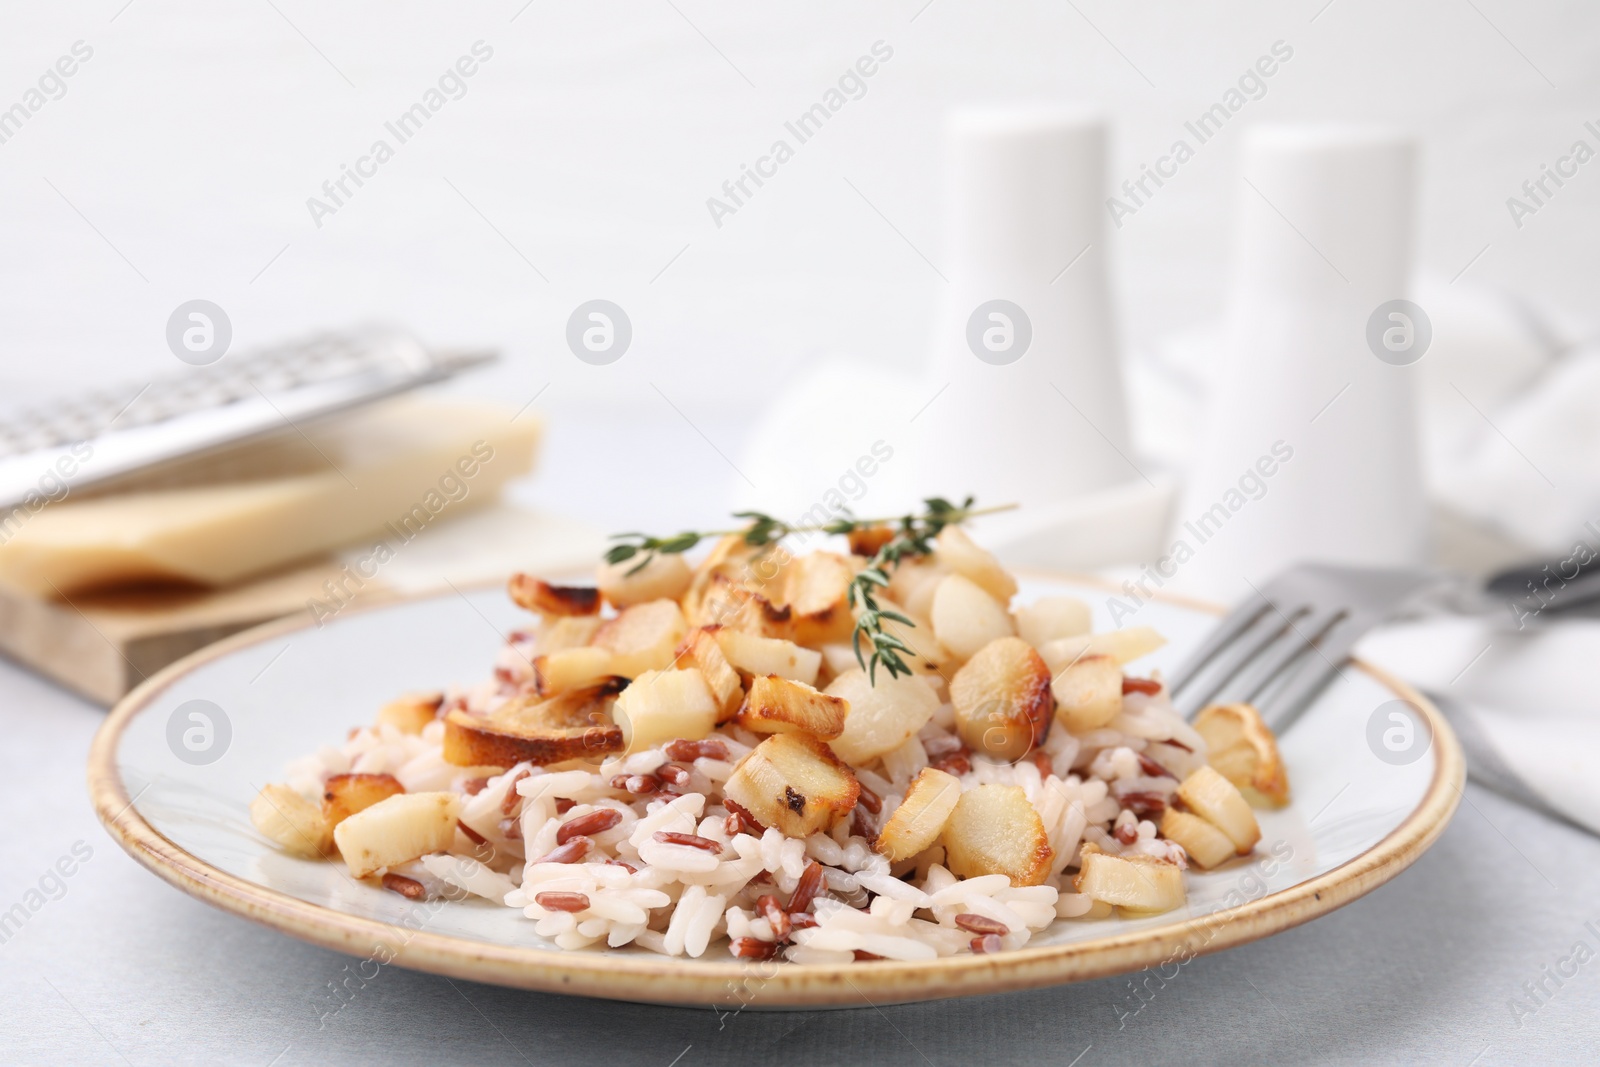 Photo of Plate with baked salsify roots, lemon, rice and fork on light grey table, closeup